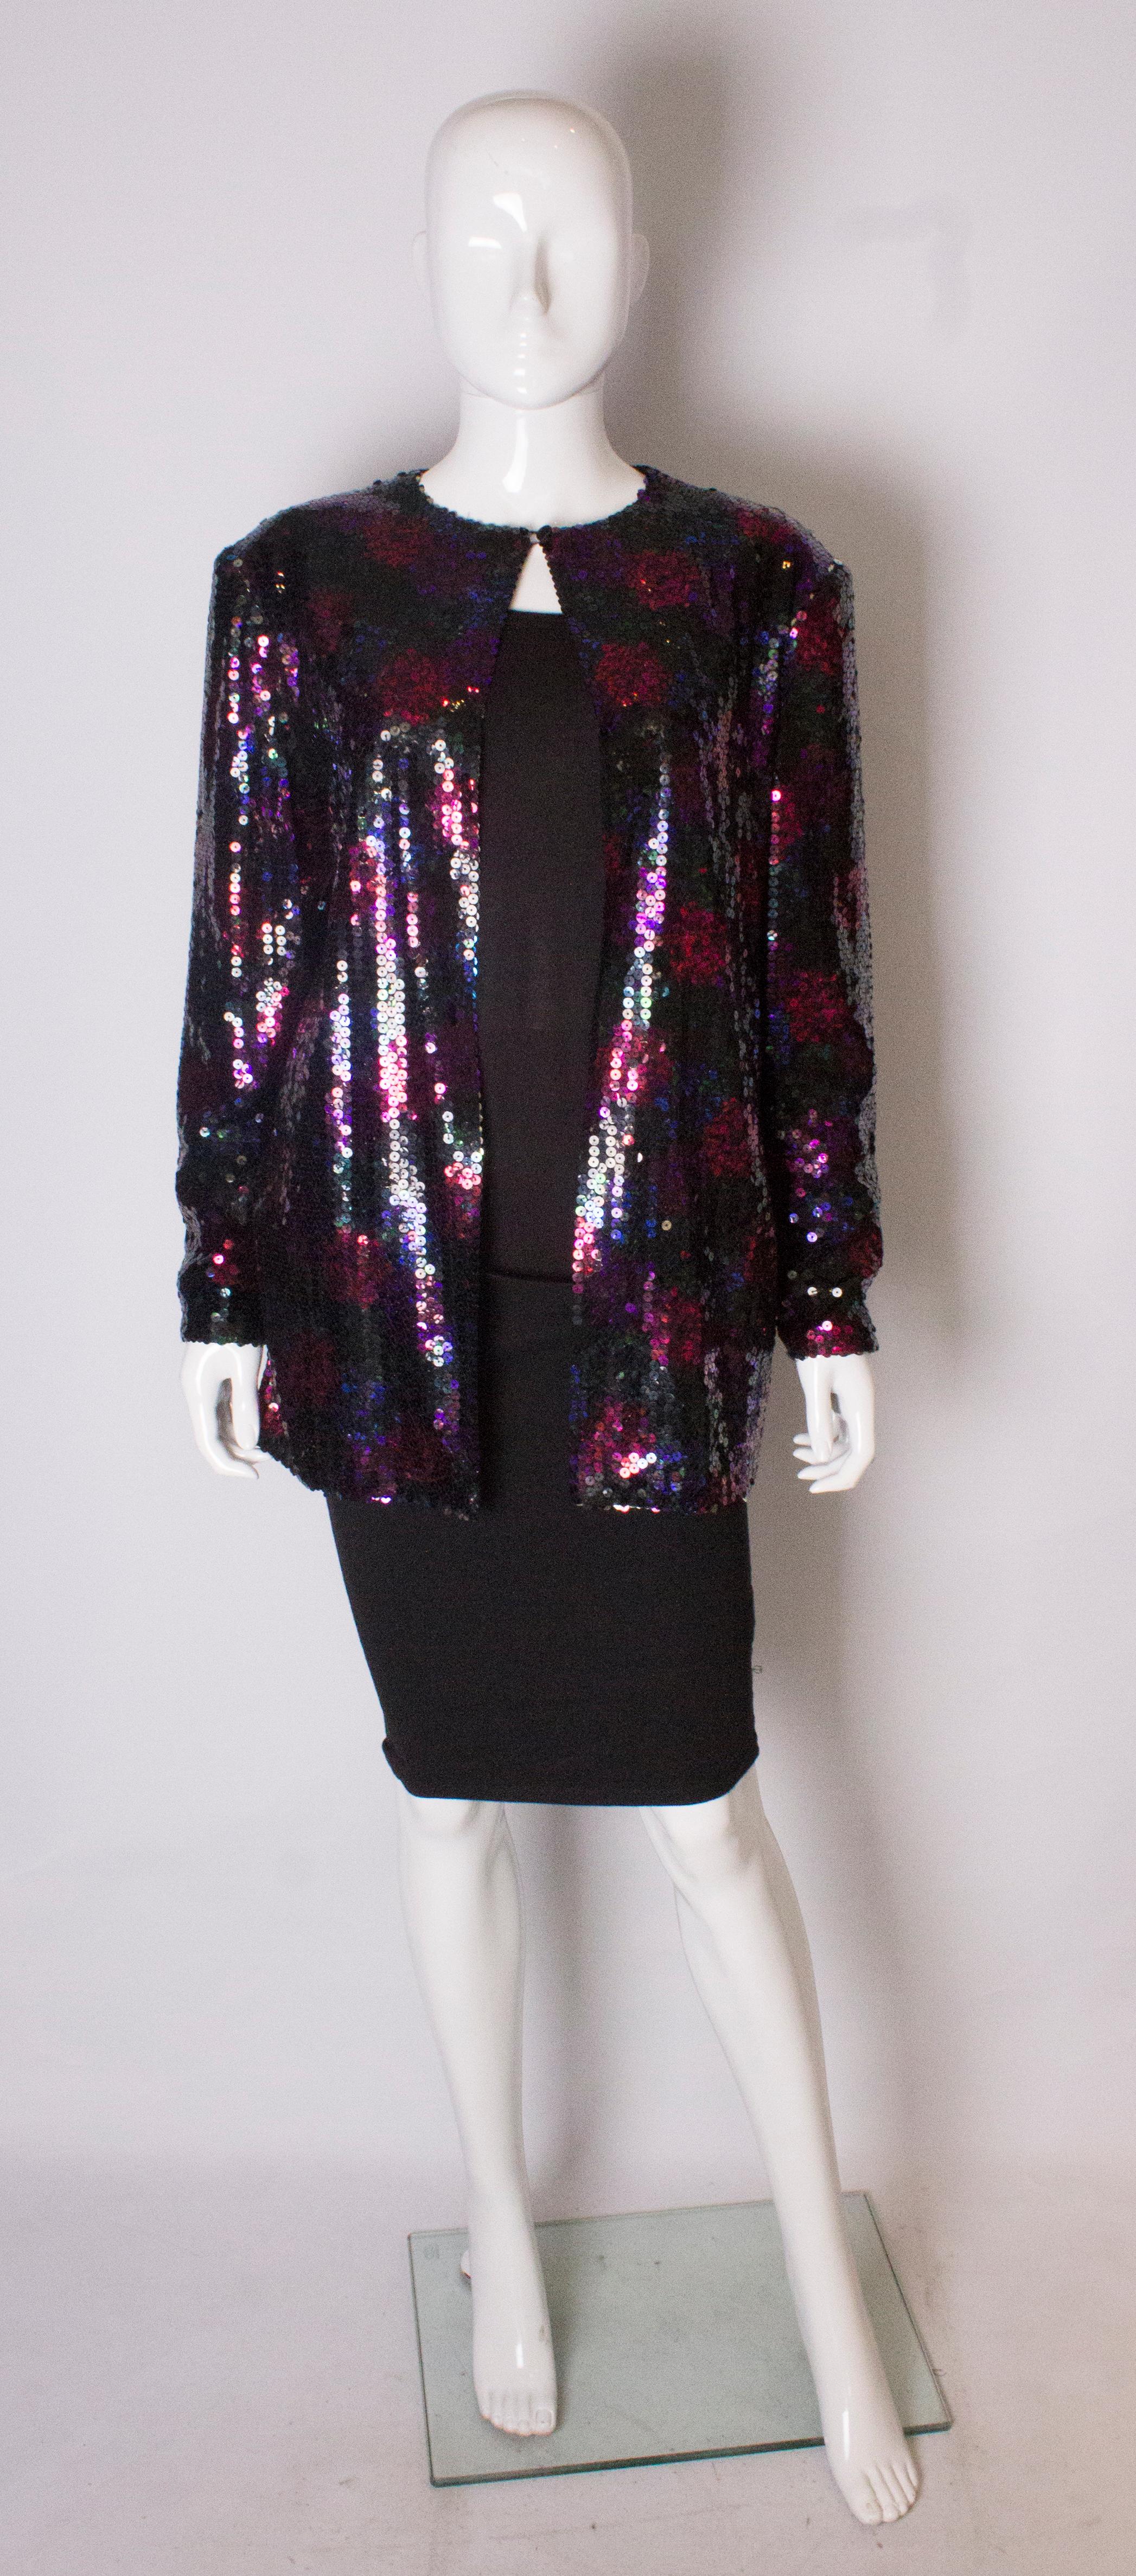 A chic and easy to wear jacket by Jacques Azagury. The round neck jacket fastens with one button at the neck and is in a combination of pink, red and purple sequins. It fits a bust up to 40''.